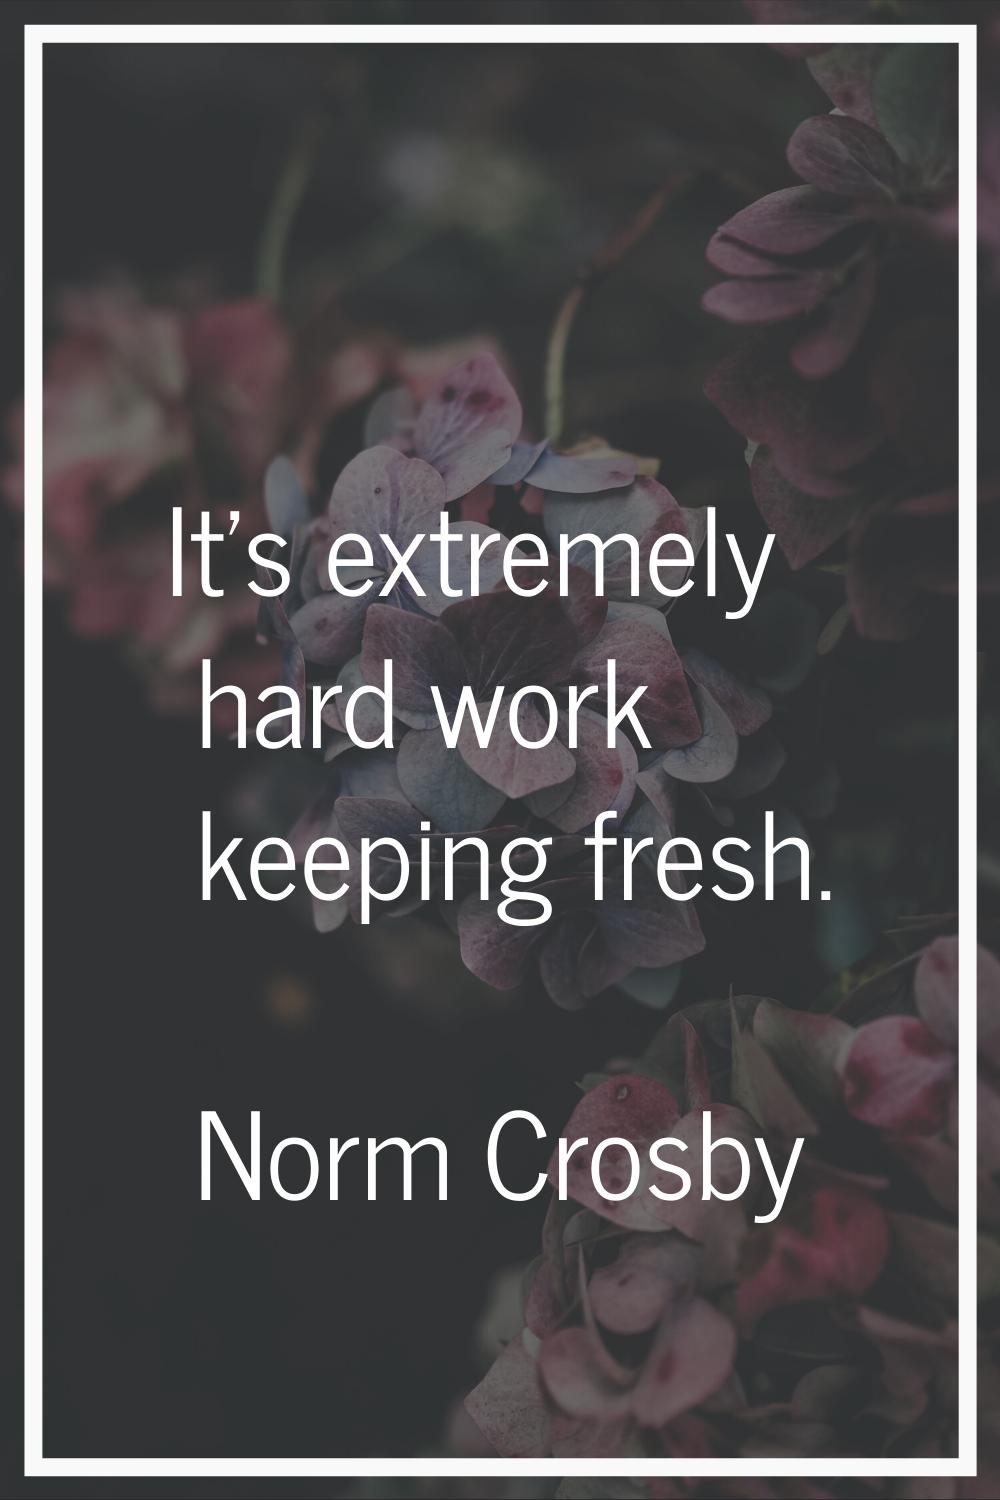 It's extremely hard work keeping fresh.